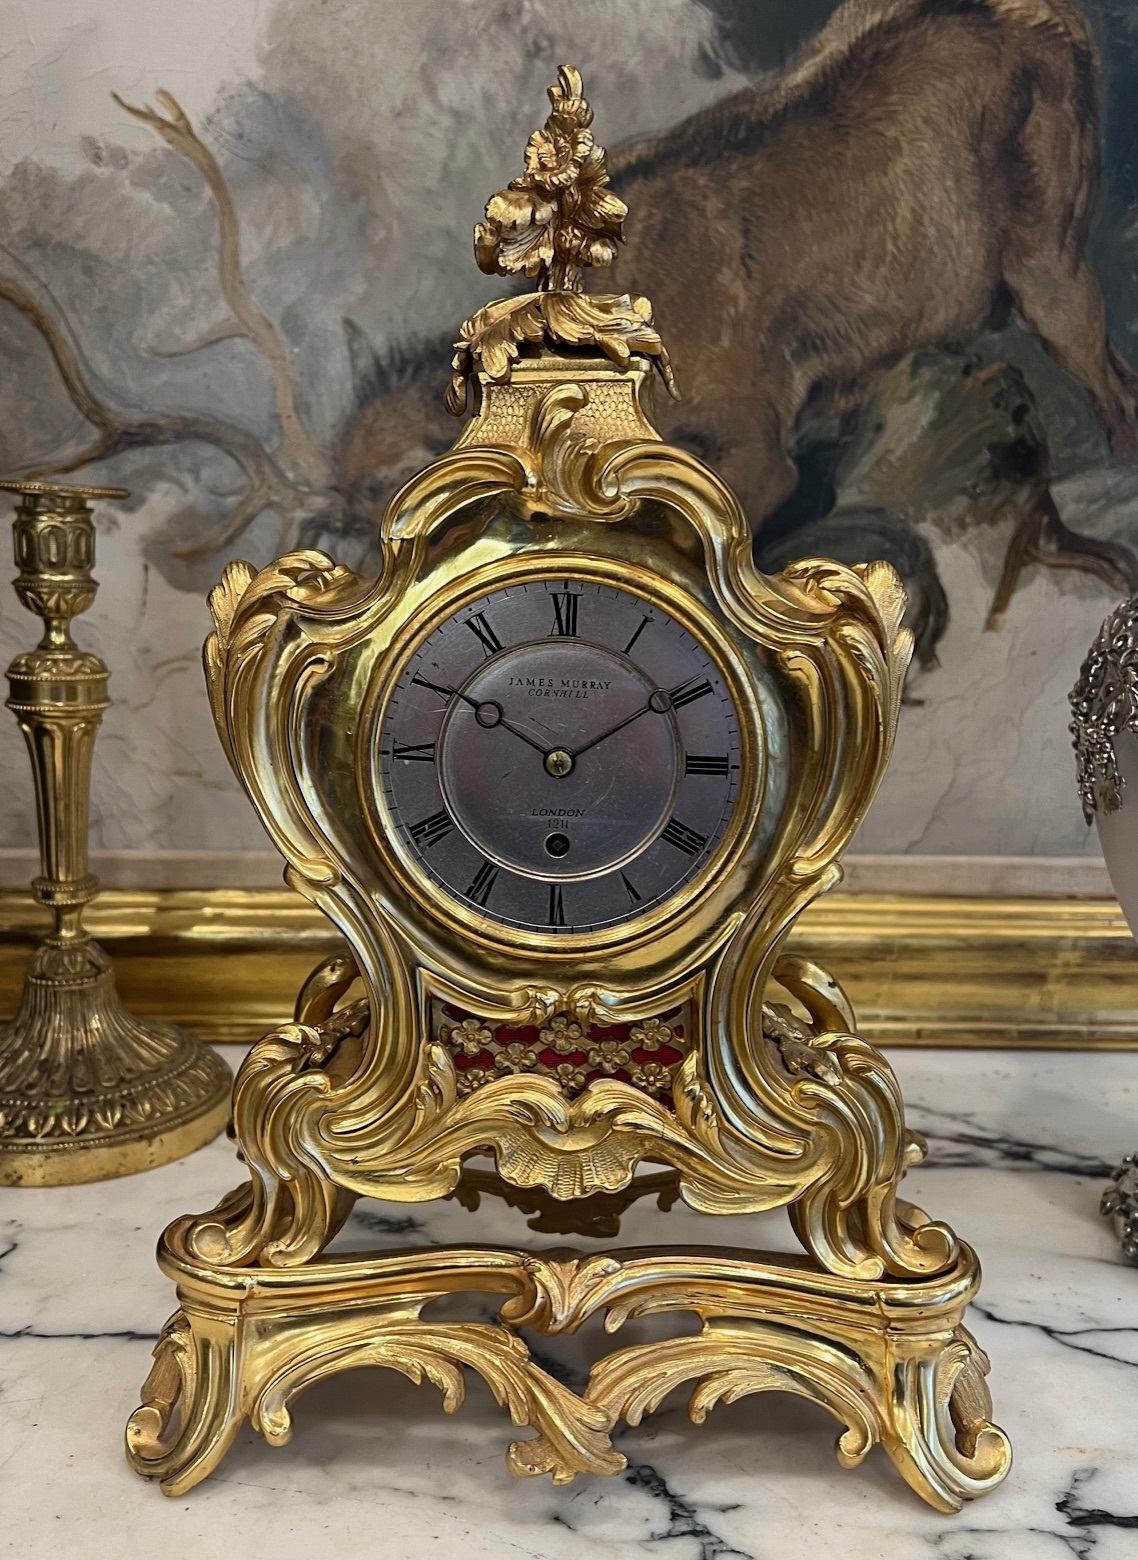 A FINE EARLY 19TH CENTURY REGENCY GILT BRONZE CLOCK BY JAMES MURRAY, CORNHILL, LONDON - Image 3 of 7